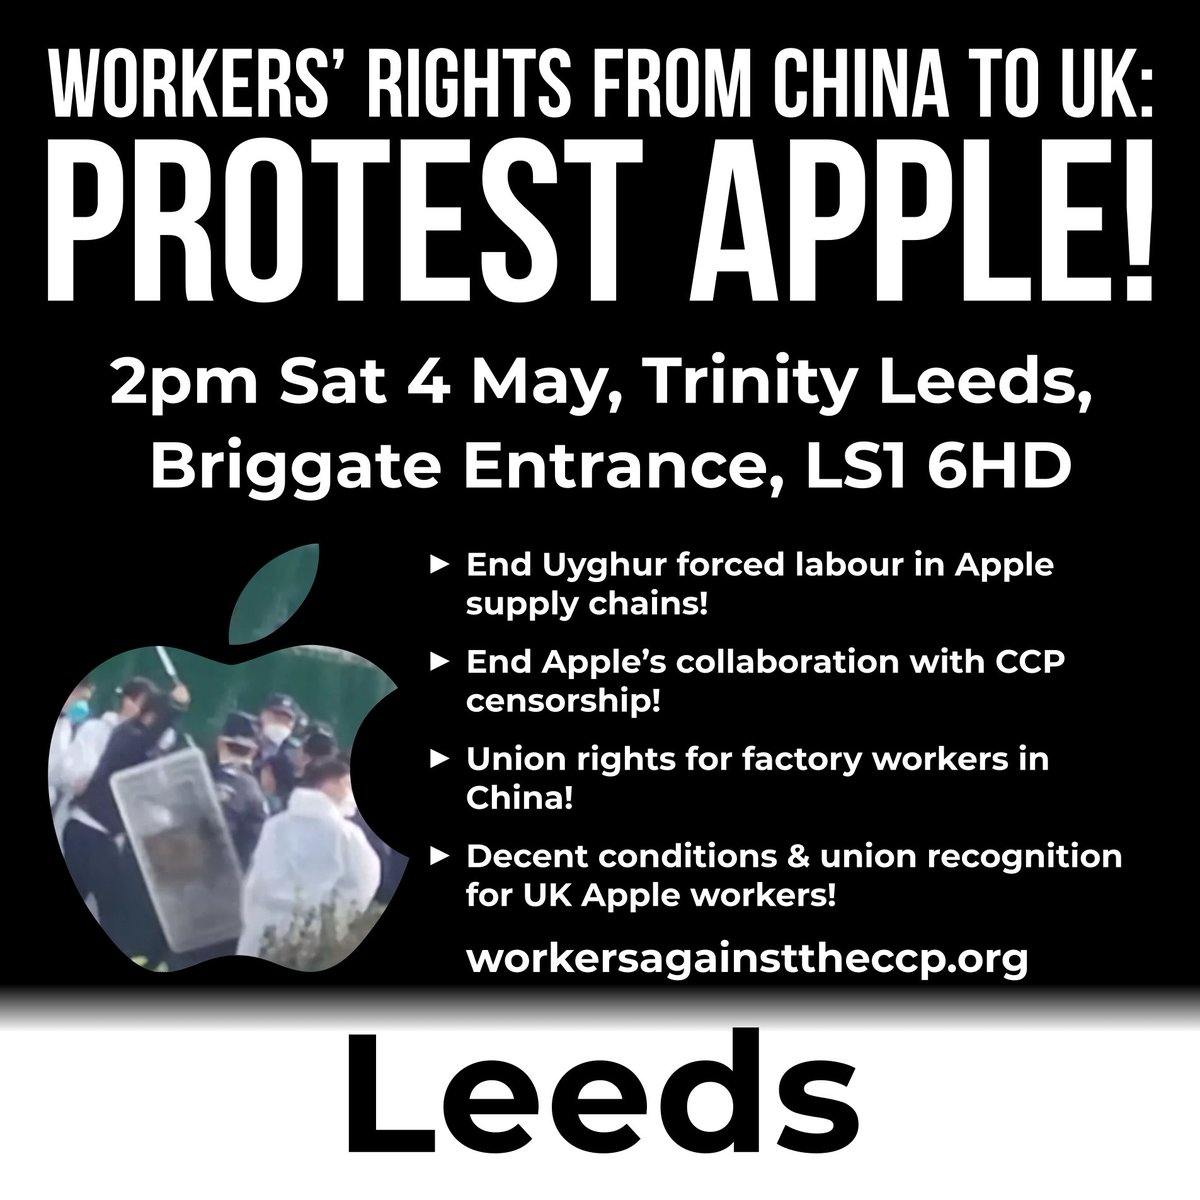 Our protests against Apple are spreading. Join us in Leeds, for workers' rights from 🇨🇳 to 🇬🇧!

🪧 Free unions & end Uyghur forced labour in 🇨🇳 factories!
🪧 Union recognition & decent work conditions in 🇬🇧!
🪧 Stop censorship!

2pm 4 May @ Briggate Entrance to Trinity Leeds